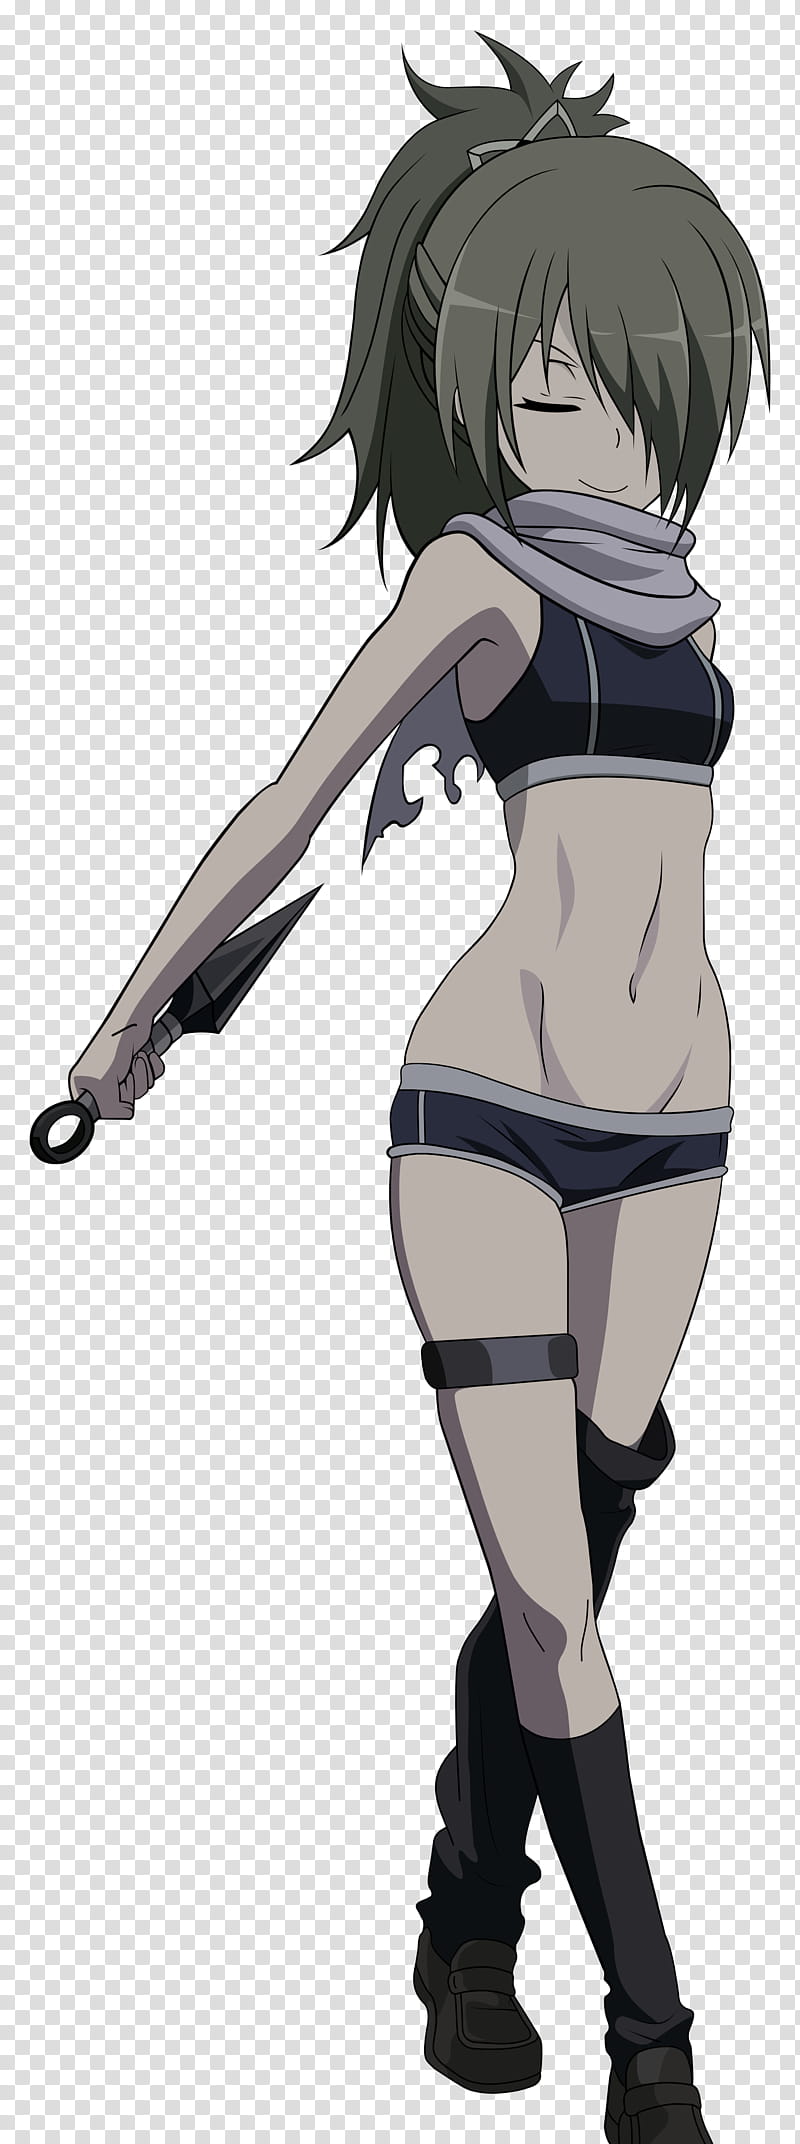 Levi, gray-haired female anime character holding kunai transparent background PNG clipart